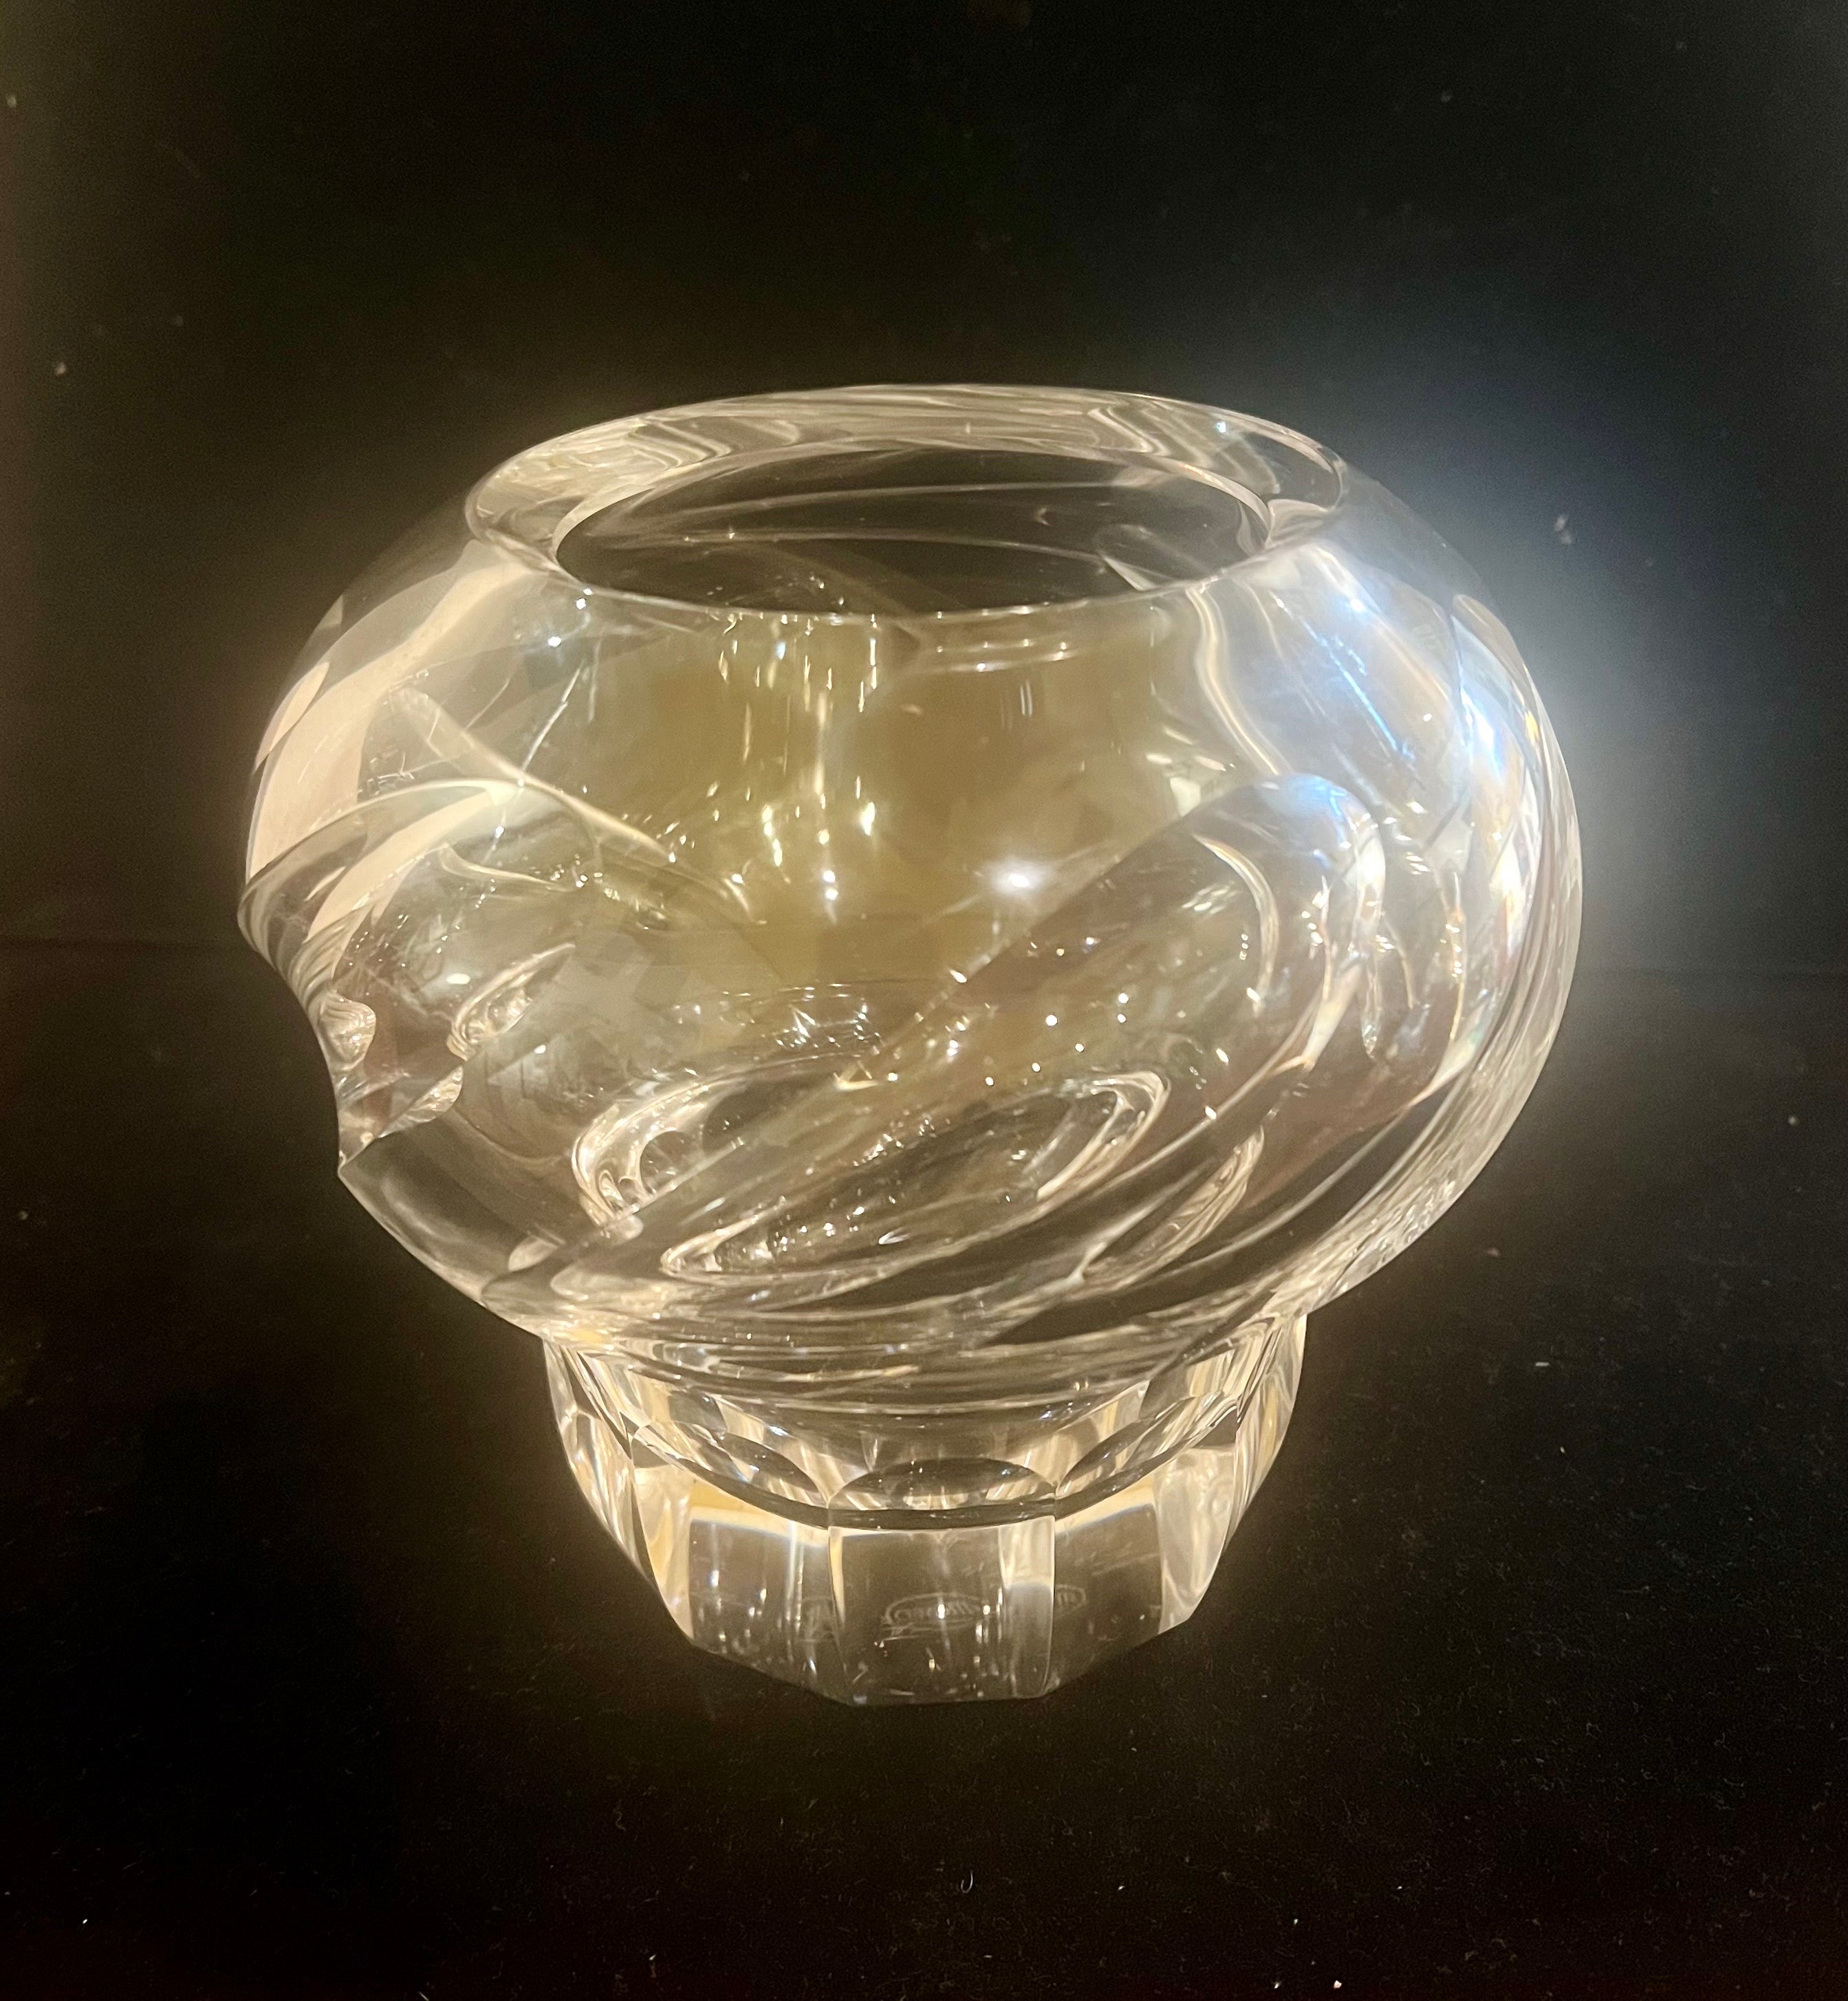 Beautiful Elegant Crystal vase by Moser circa 1980's, excellent condition no chips or scratches gorgeous design.